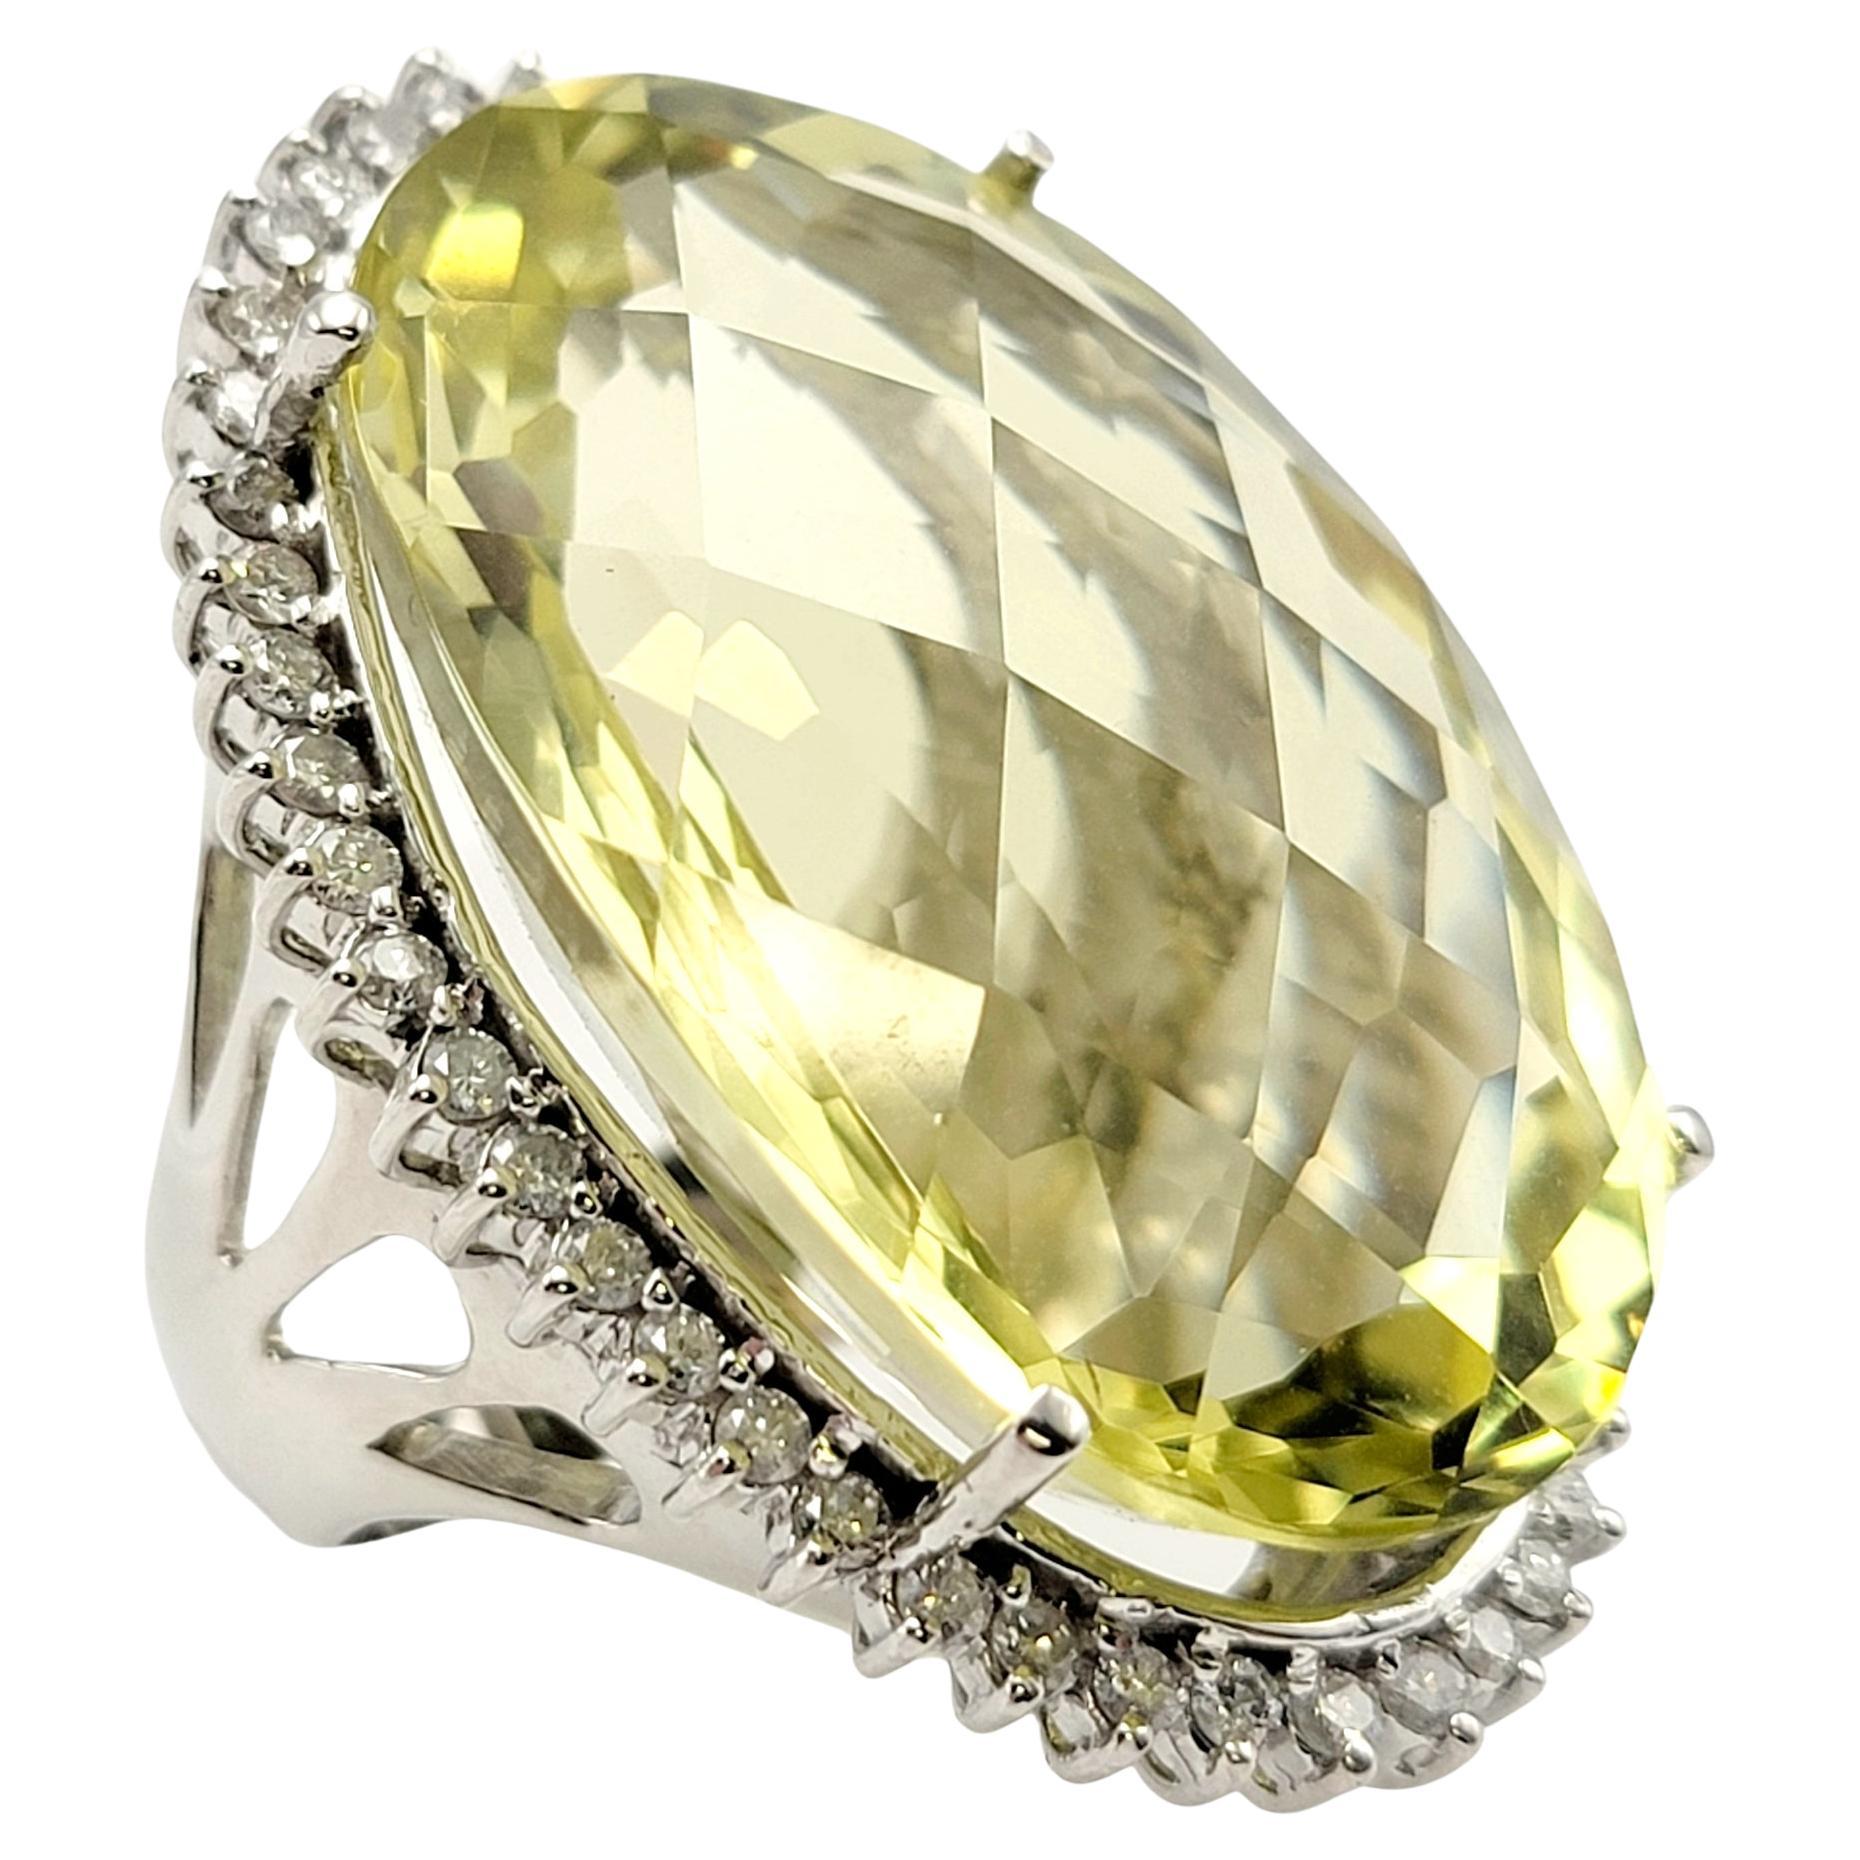 Ring size: 6

Huge, show-stopping cocktail ring absolutely lights up the finger. The stunning oversize lemon citrine quartz stone sparkles spectacularly with its bright, crystal clear greenish-yellow color. The halo of icy white diamonds frames this